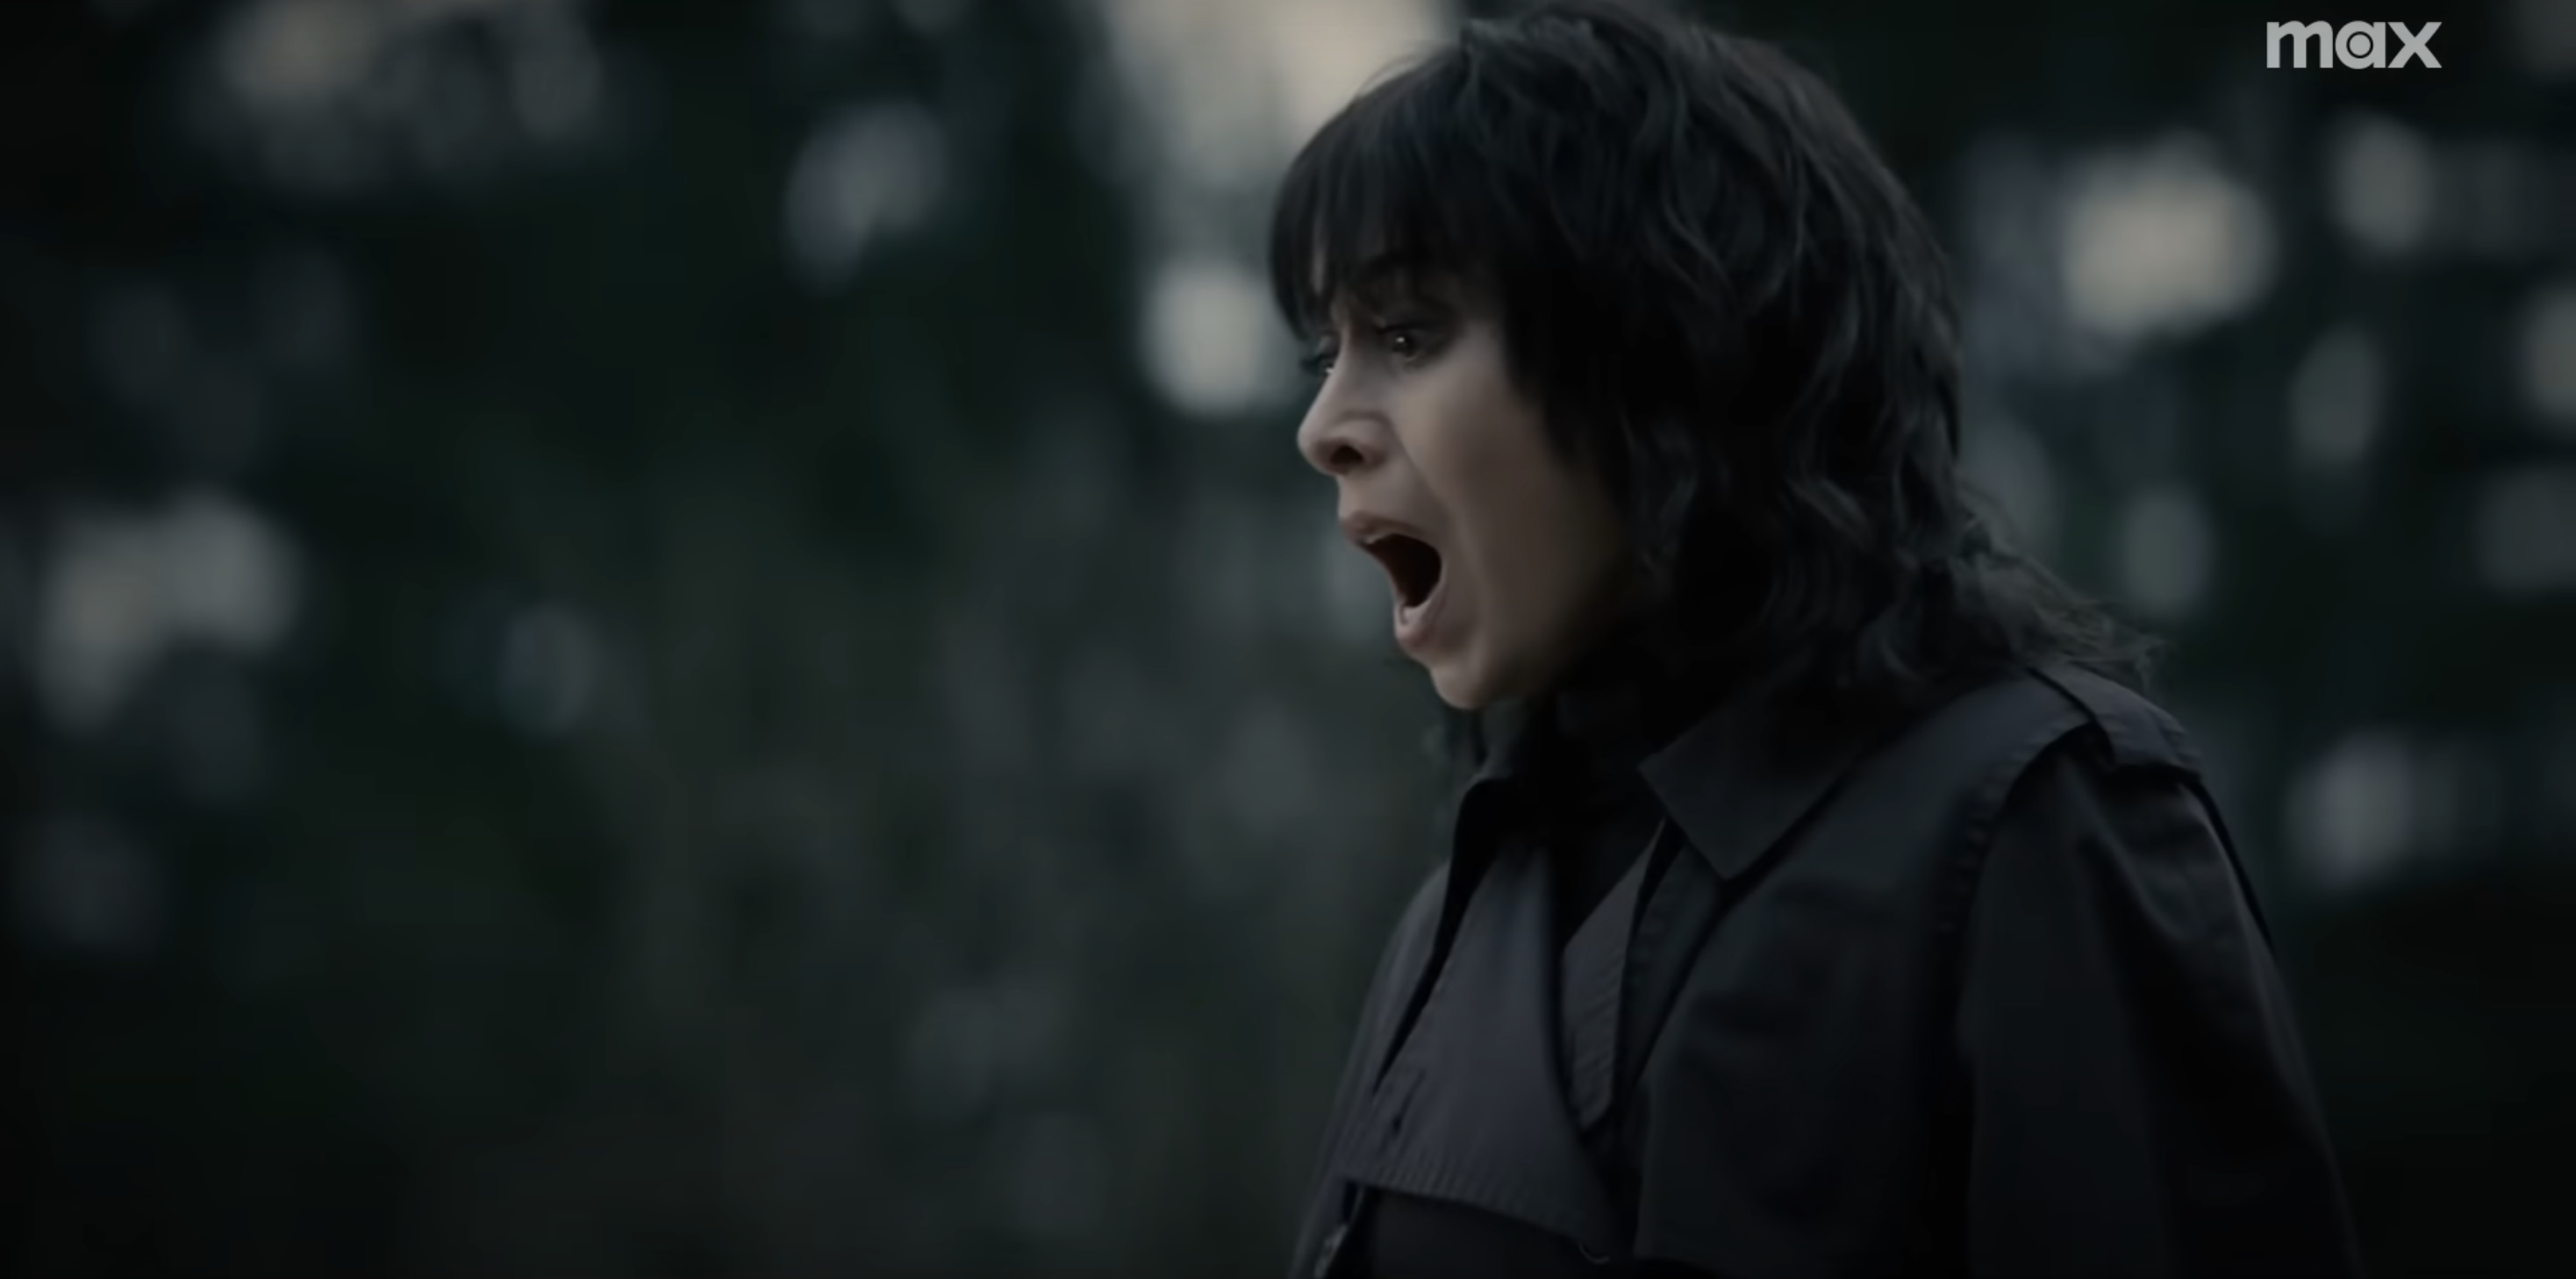 Character in a dark outfit with an open mouth, expressing shock or fear, in a forest setting